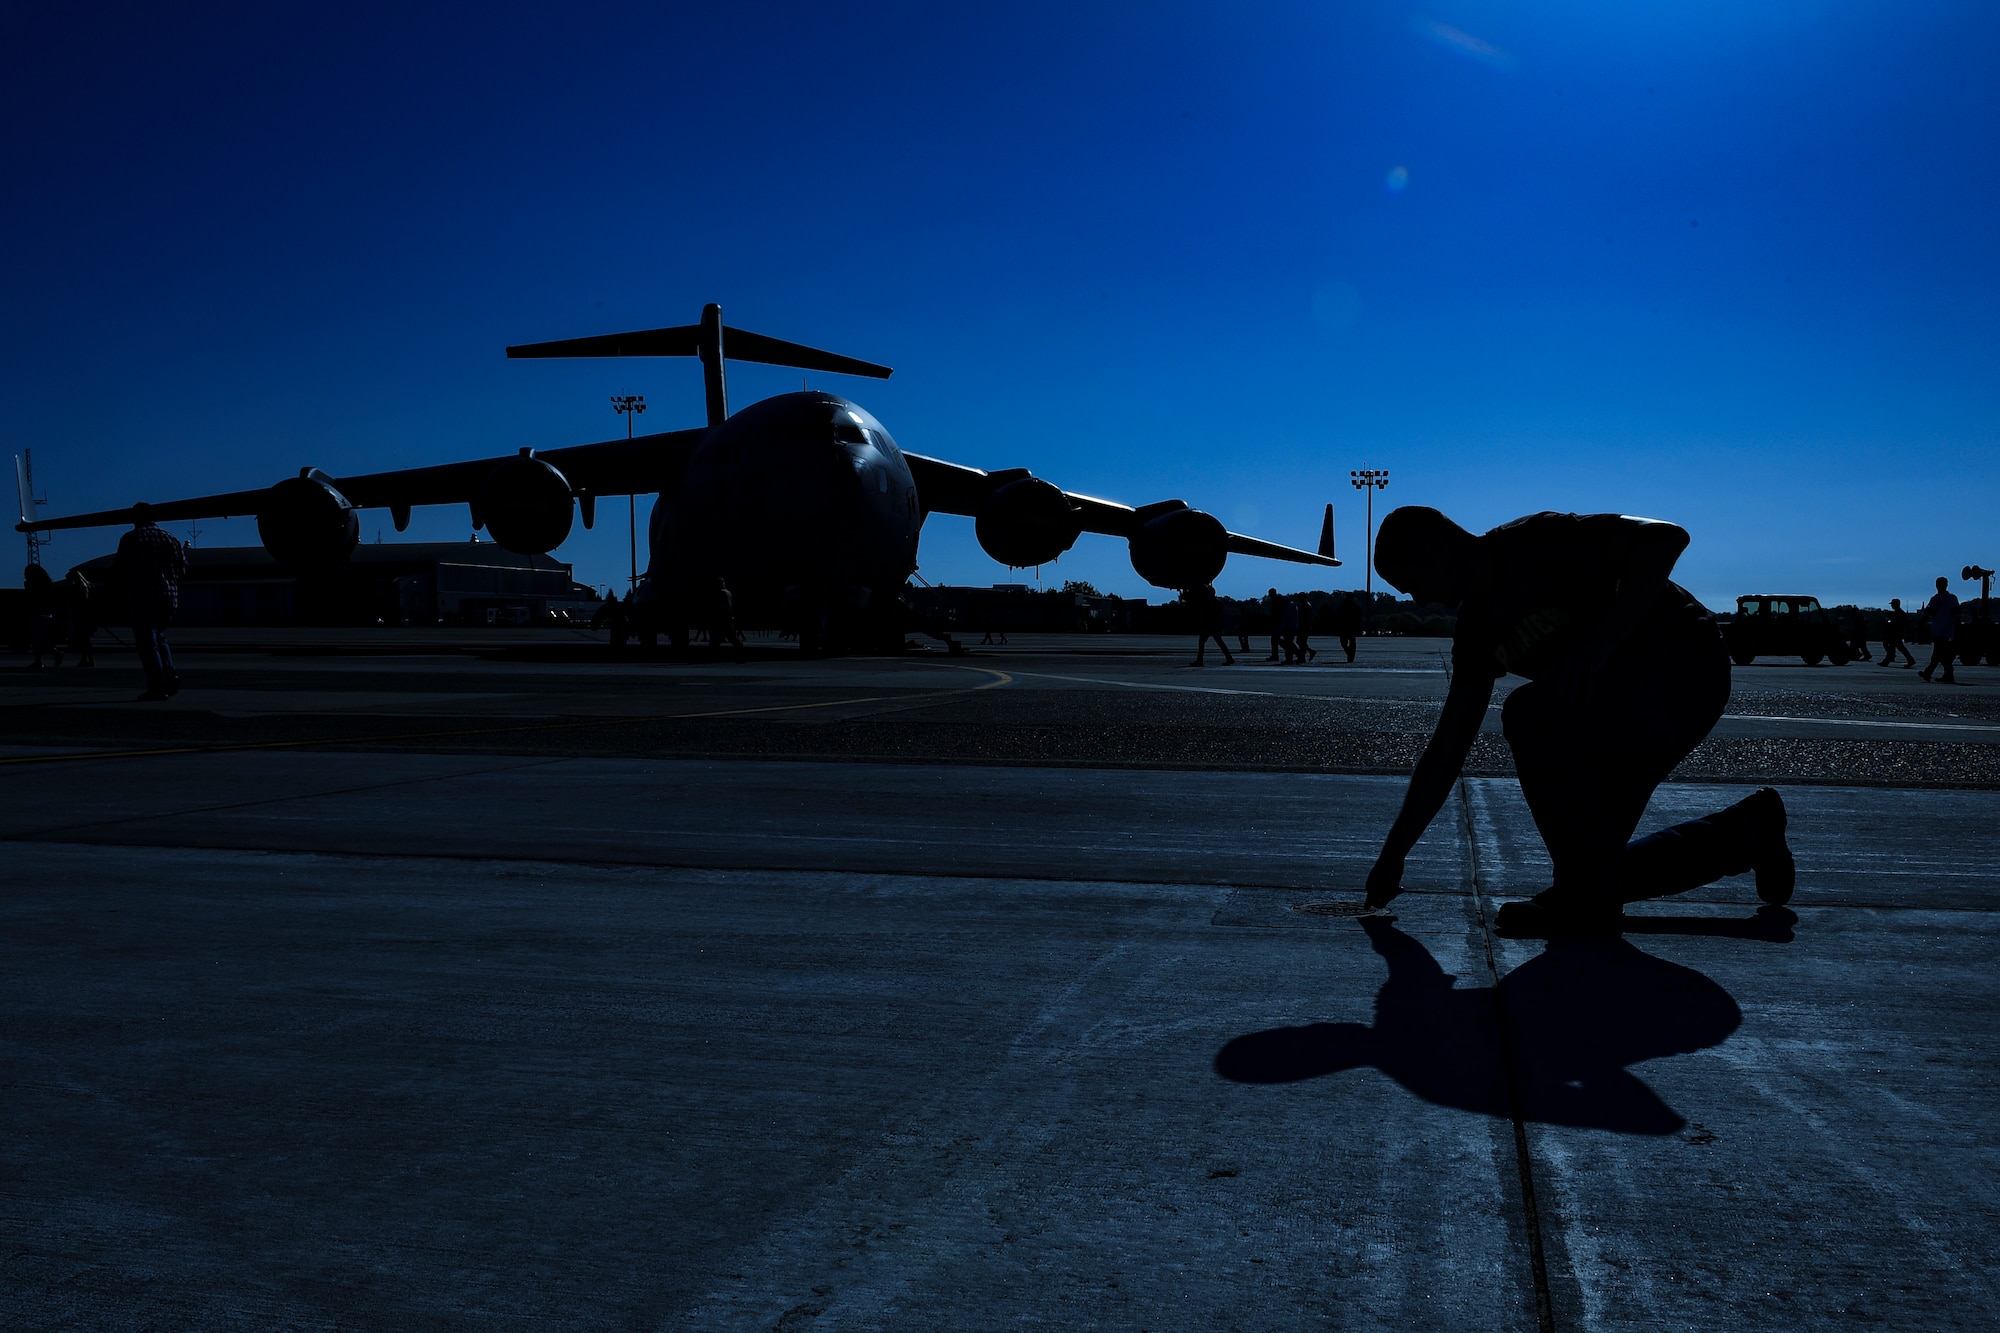 Tech. Sgt. Jason Fish, repair and reclamation/wheel and tire technician with the 911th Maintenance Group, picks up a piece of foreign object debris during a FOD walk at Pittsburgh International Airport Air Reserve Station, Pennsylvania, May 6, 2019. Performing FOD walks ensures the flightline is clear of any loose objects that could get sucked into and destroy an aircraft engine.